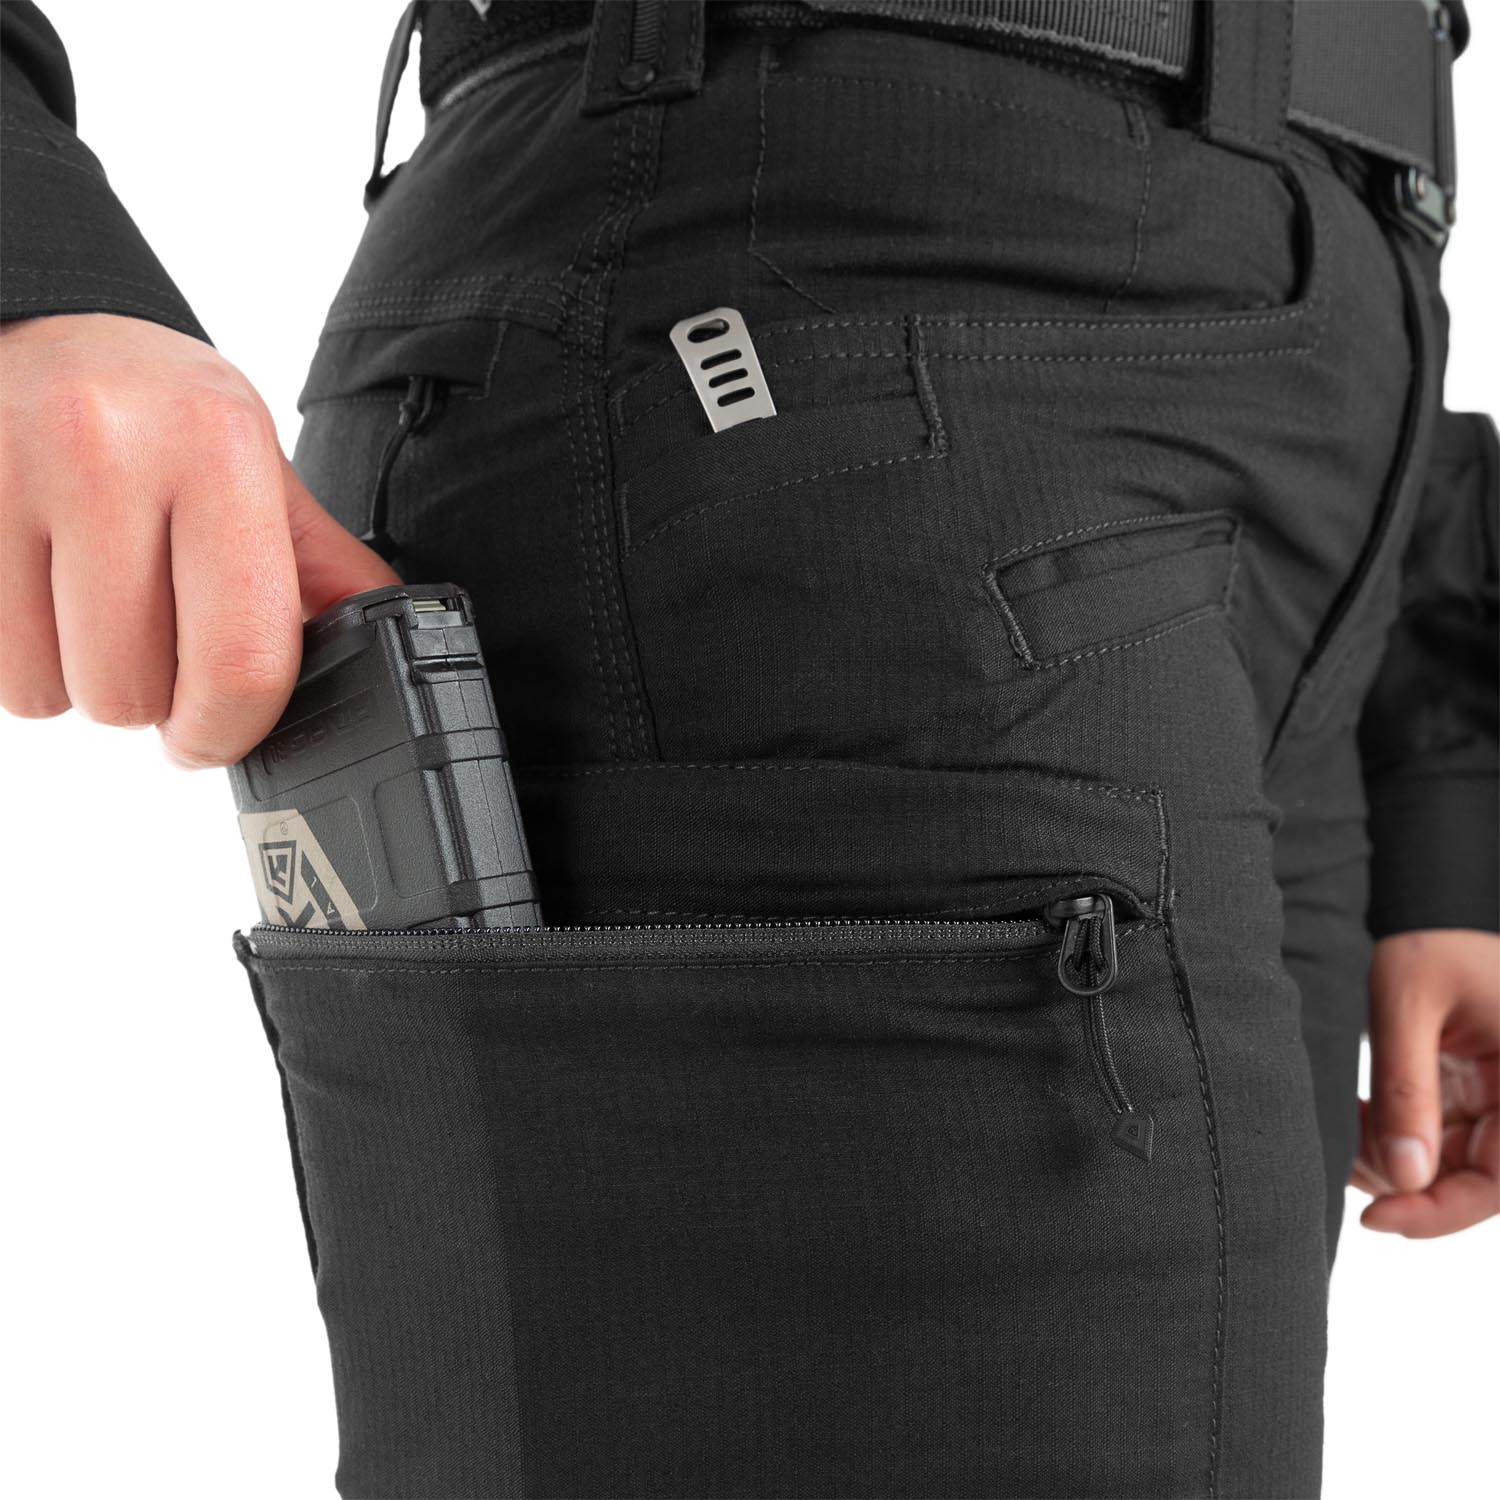 FIRST TACTICAL WOMEN'S DEFENDER PANTS